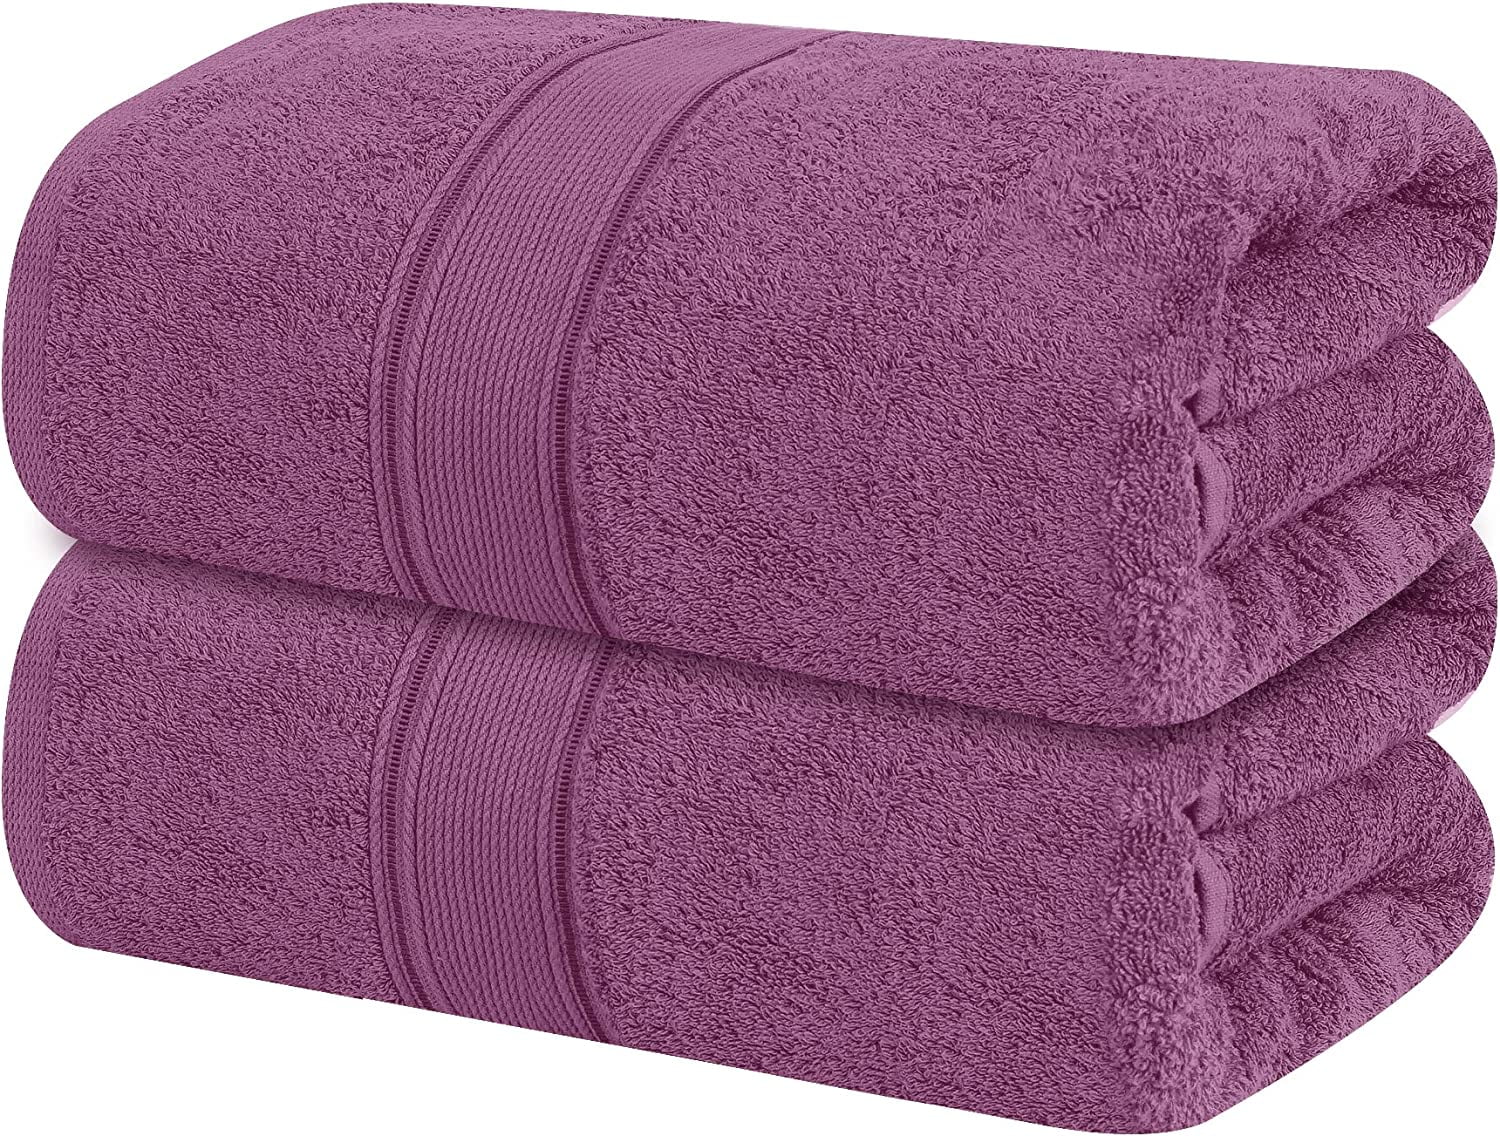 Tens Towels Large Bath Towels, 100% Cotton Towels, 30 x 60 Inches, Extra  Large Bath Towels, Lighter Weight & Super Absorbent, Quick Dry, Perfect  Bathroom Towels for Daily Use 4PK BATH TOWELS